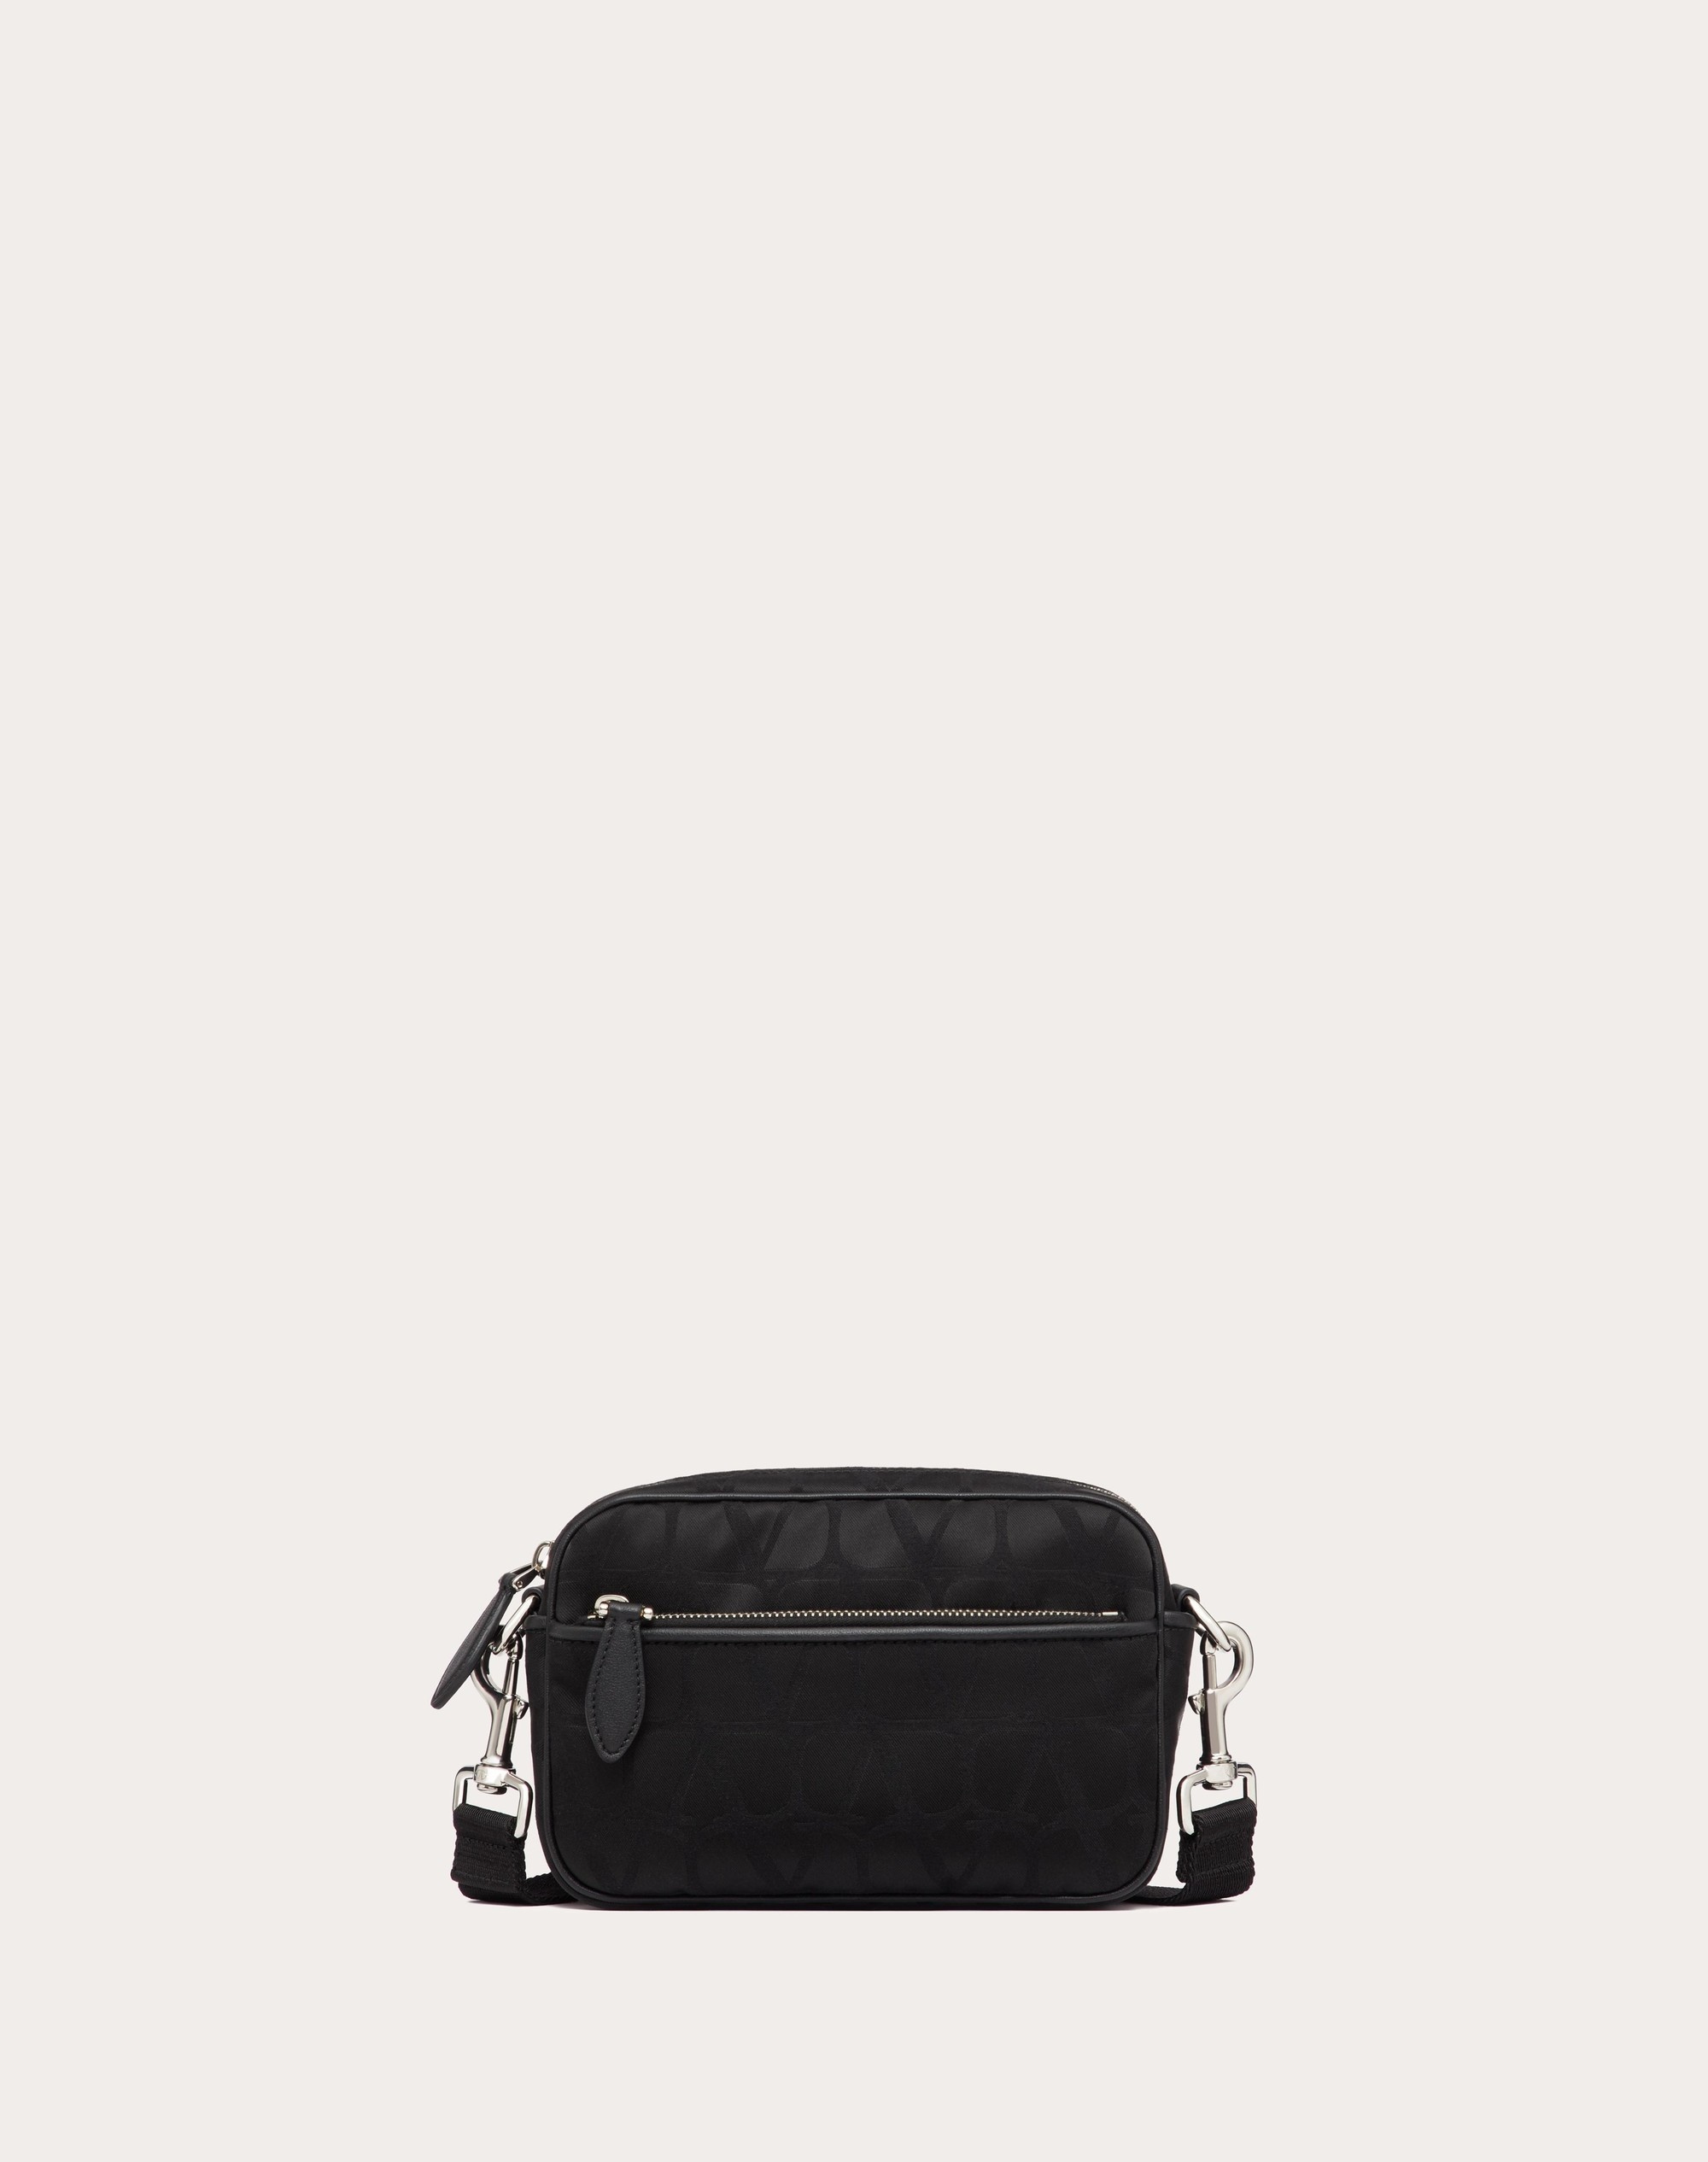 TOILE ICONOGRAPHE SHOULDER BAG IN TECHNICAL FABRIC WITH LEATHER DETAILS - 1